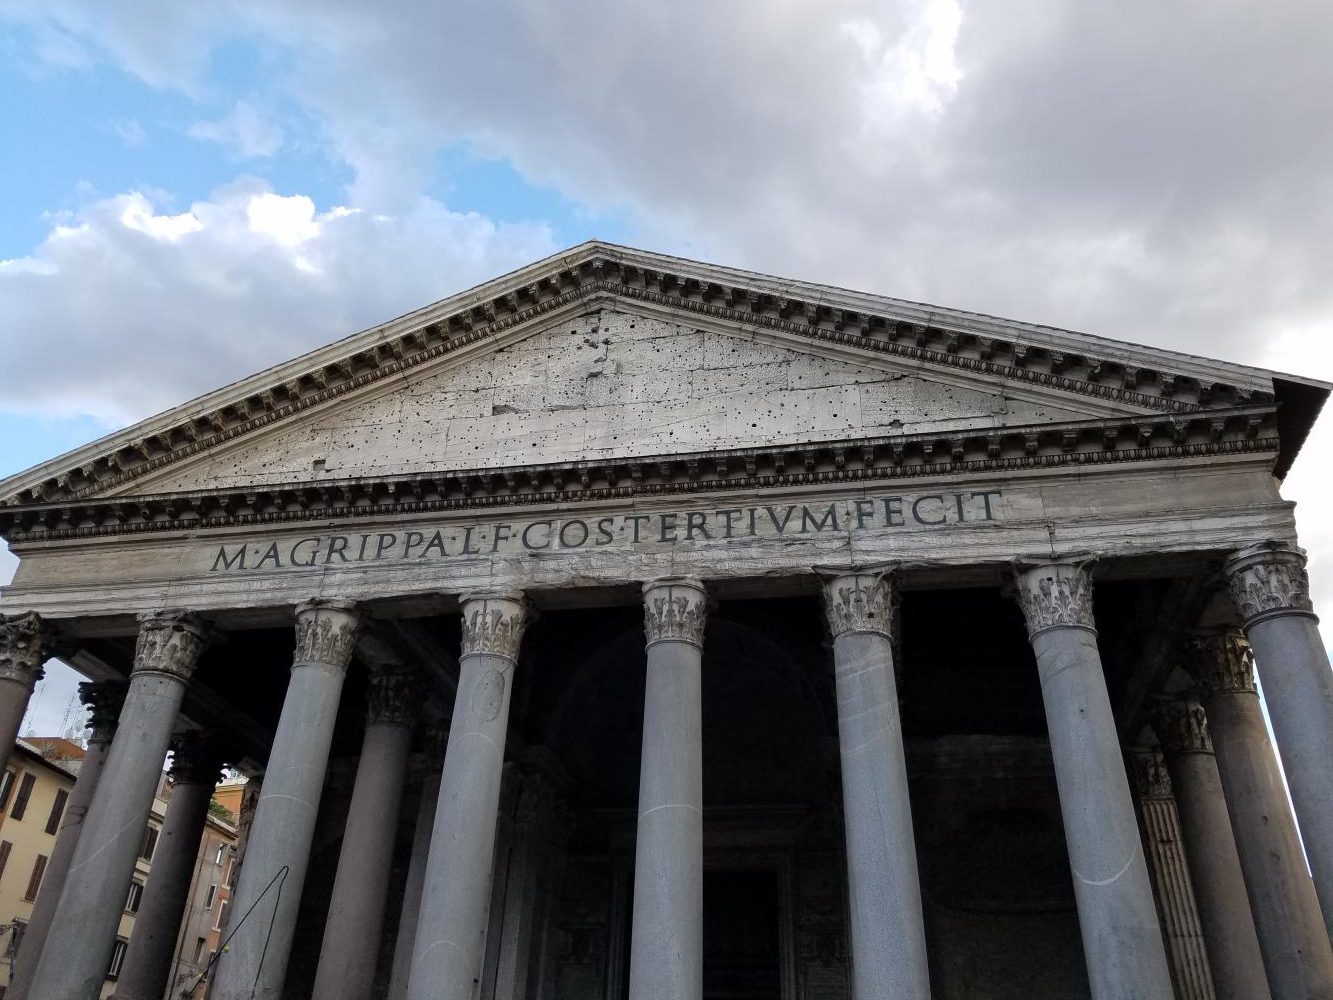 The entrance to the famed Pantheon in Rome features Latin writing at its entrance.